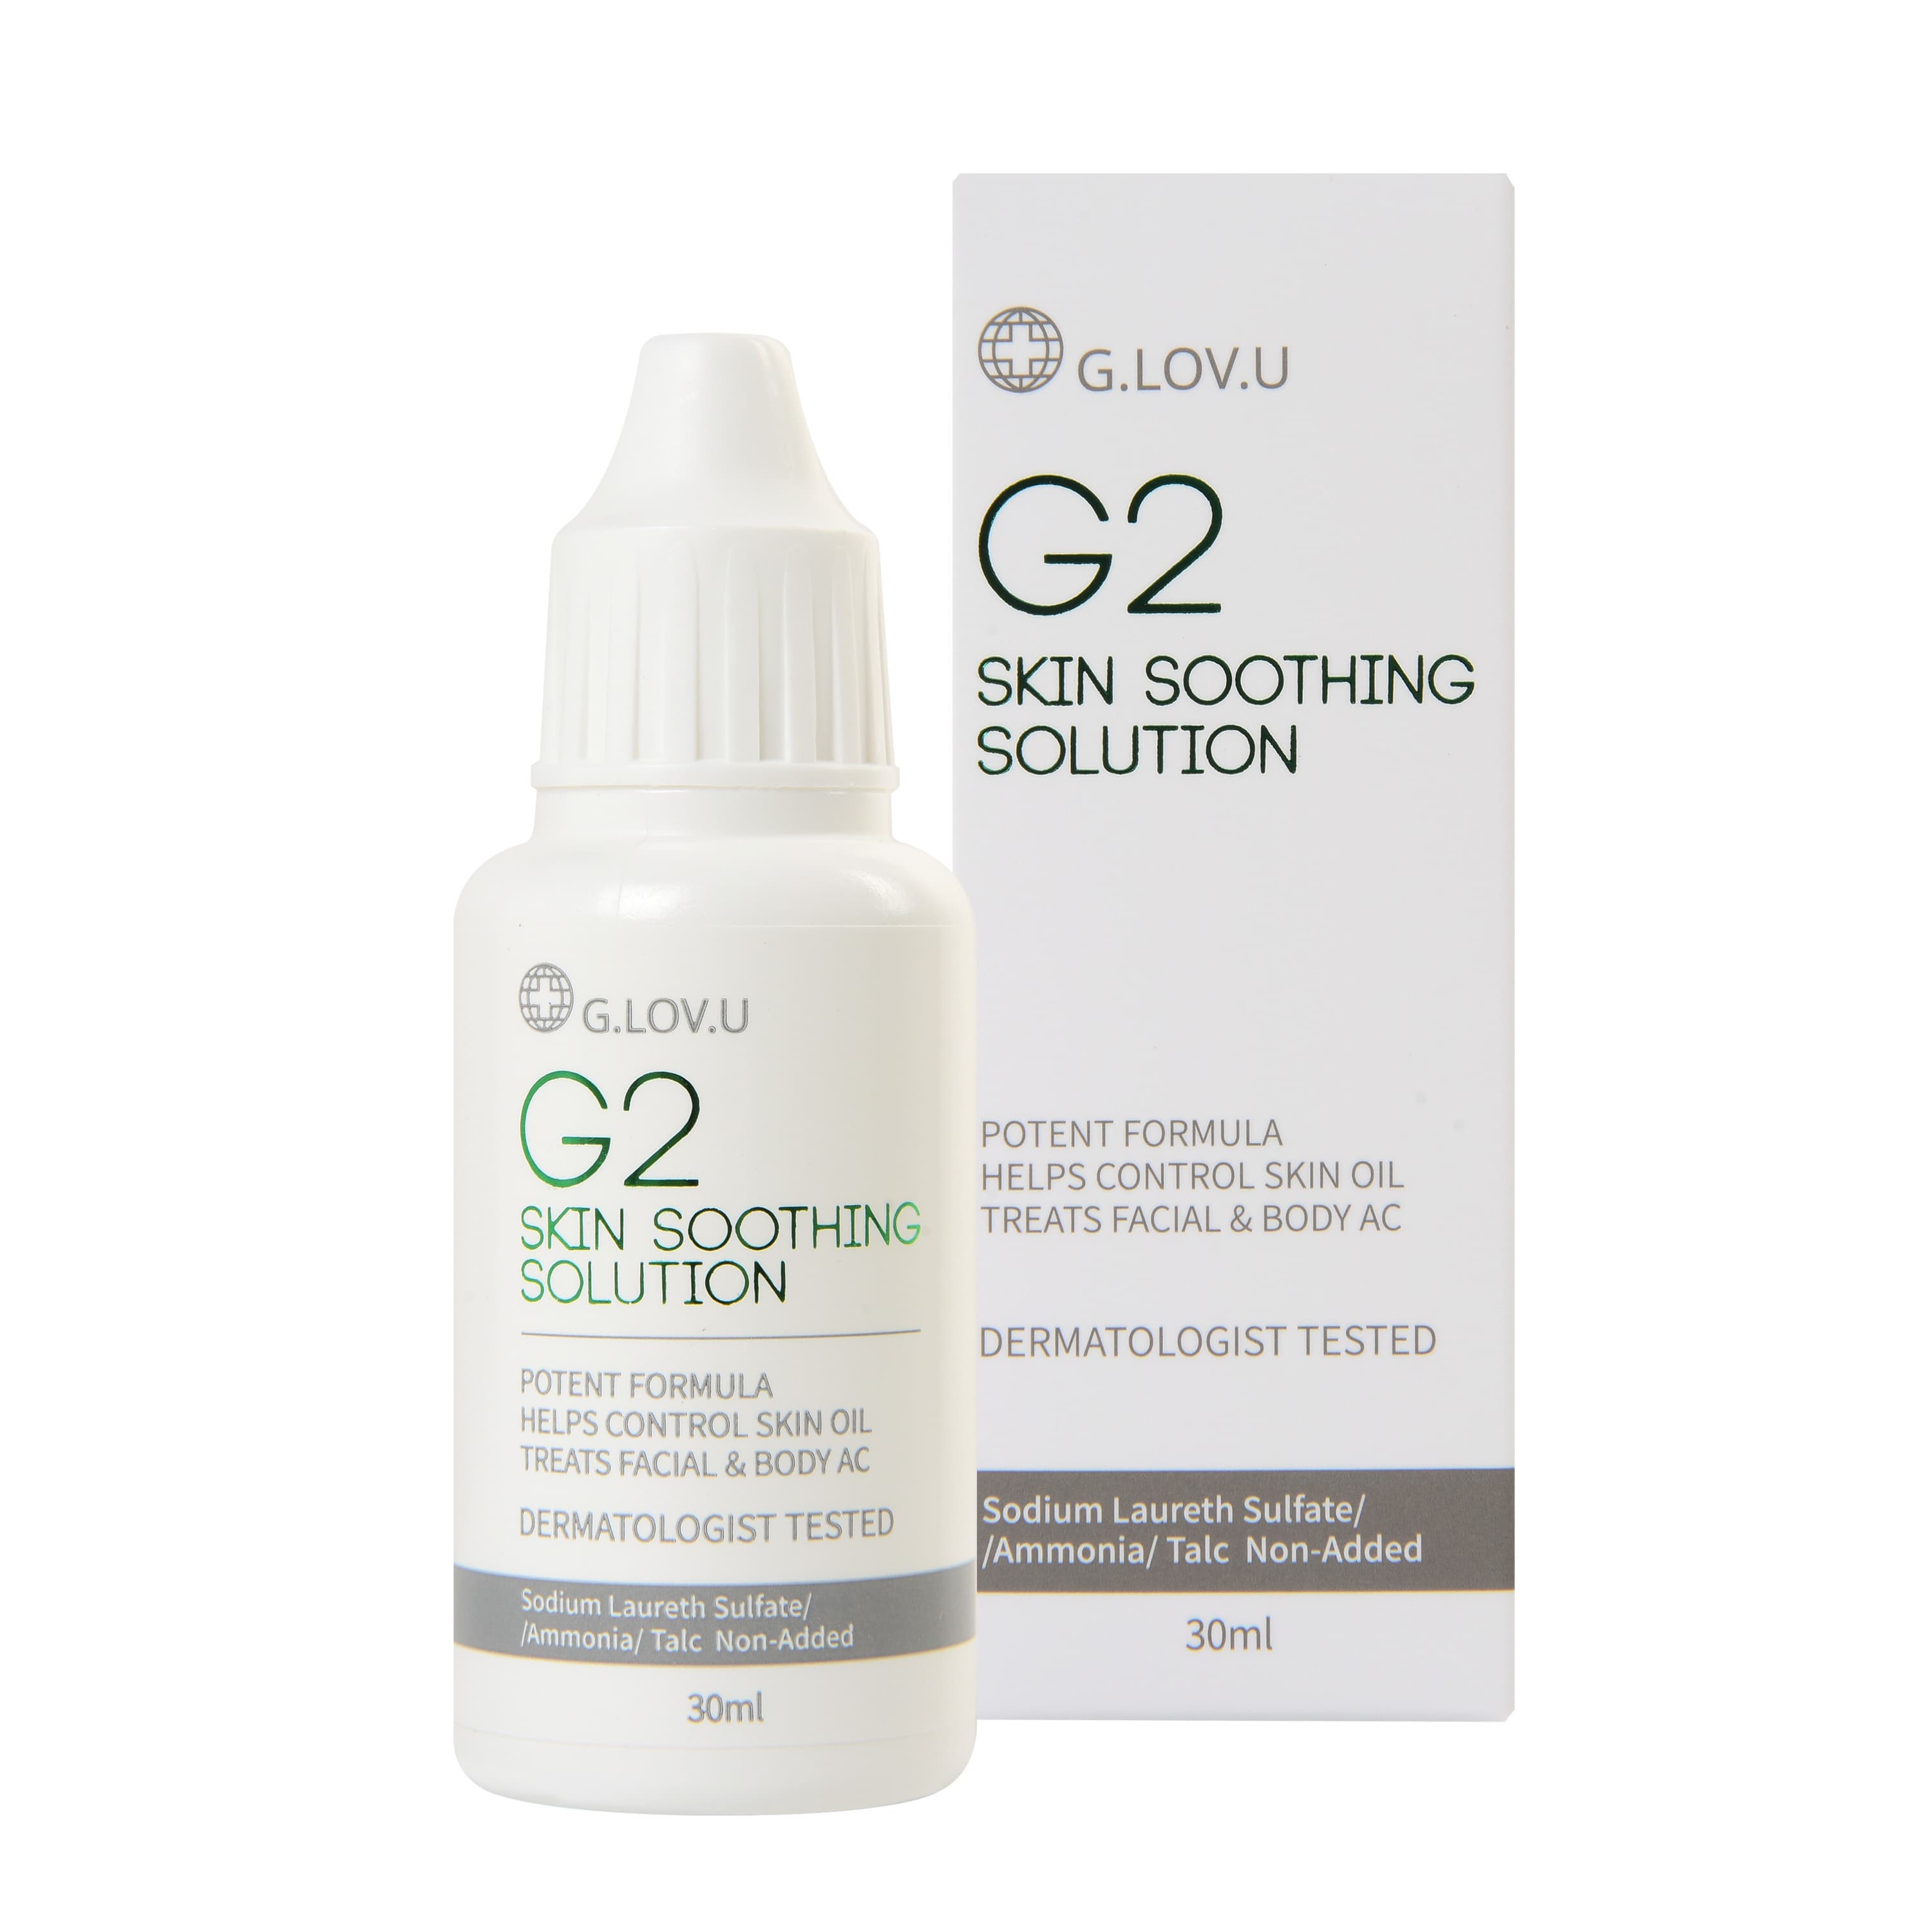 G2 GKIN SOOTHING SOLUTION_Acne care cosmetic